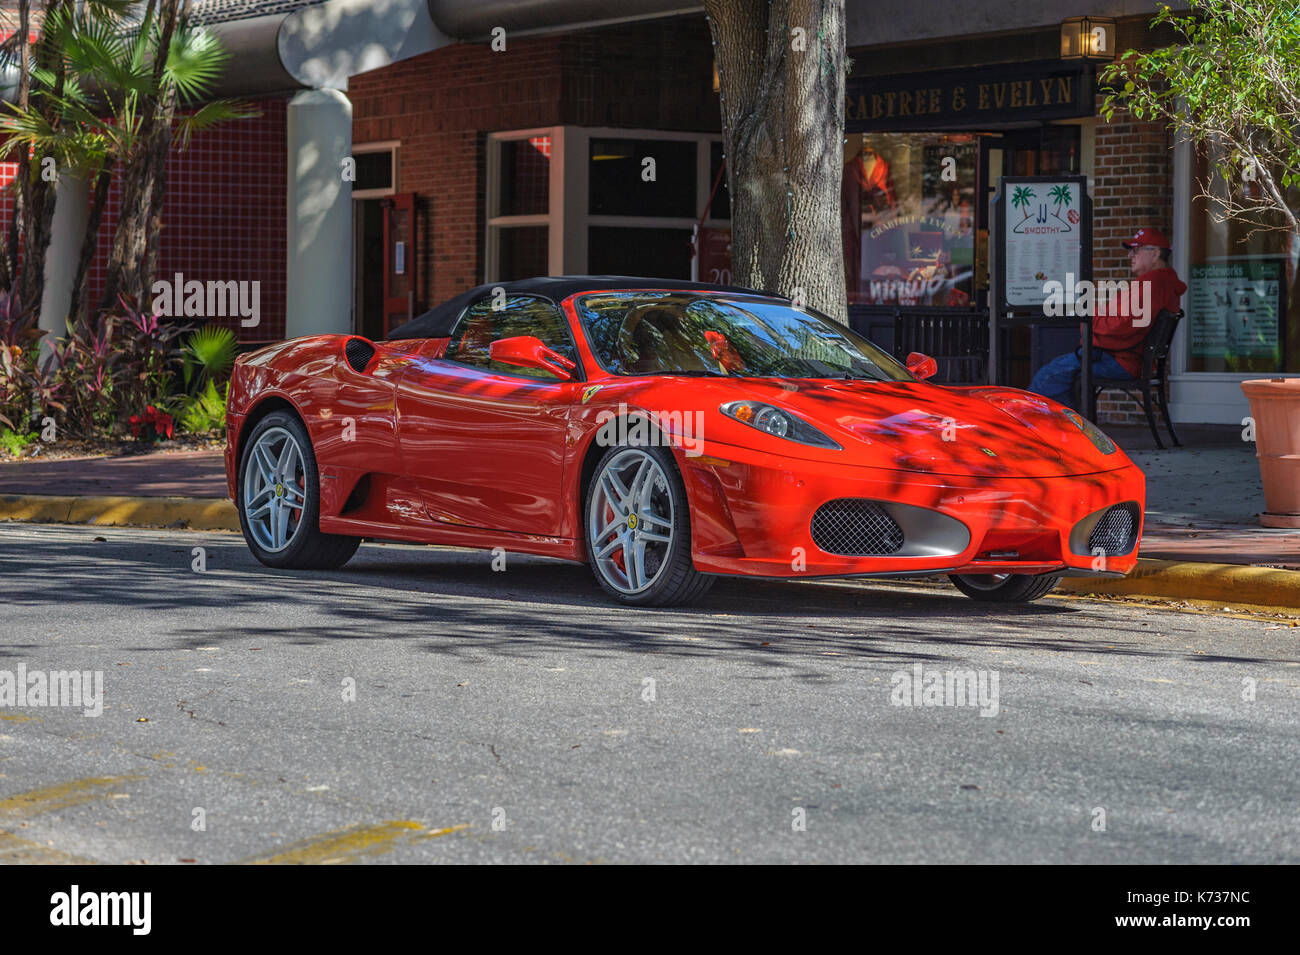 Red Ferrari F430 Spider sports car parked on the street in Hyde Park, Tampa, Florida, United States. The Ferrari is considered a super car. Stock Photo